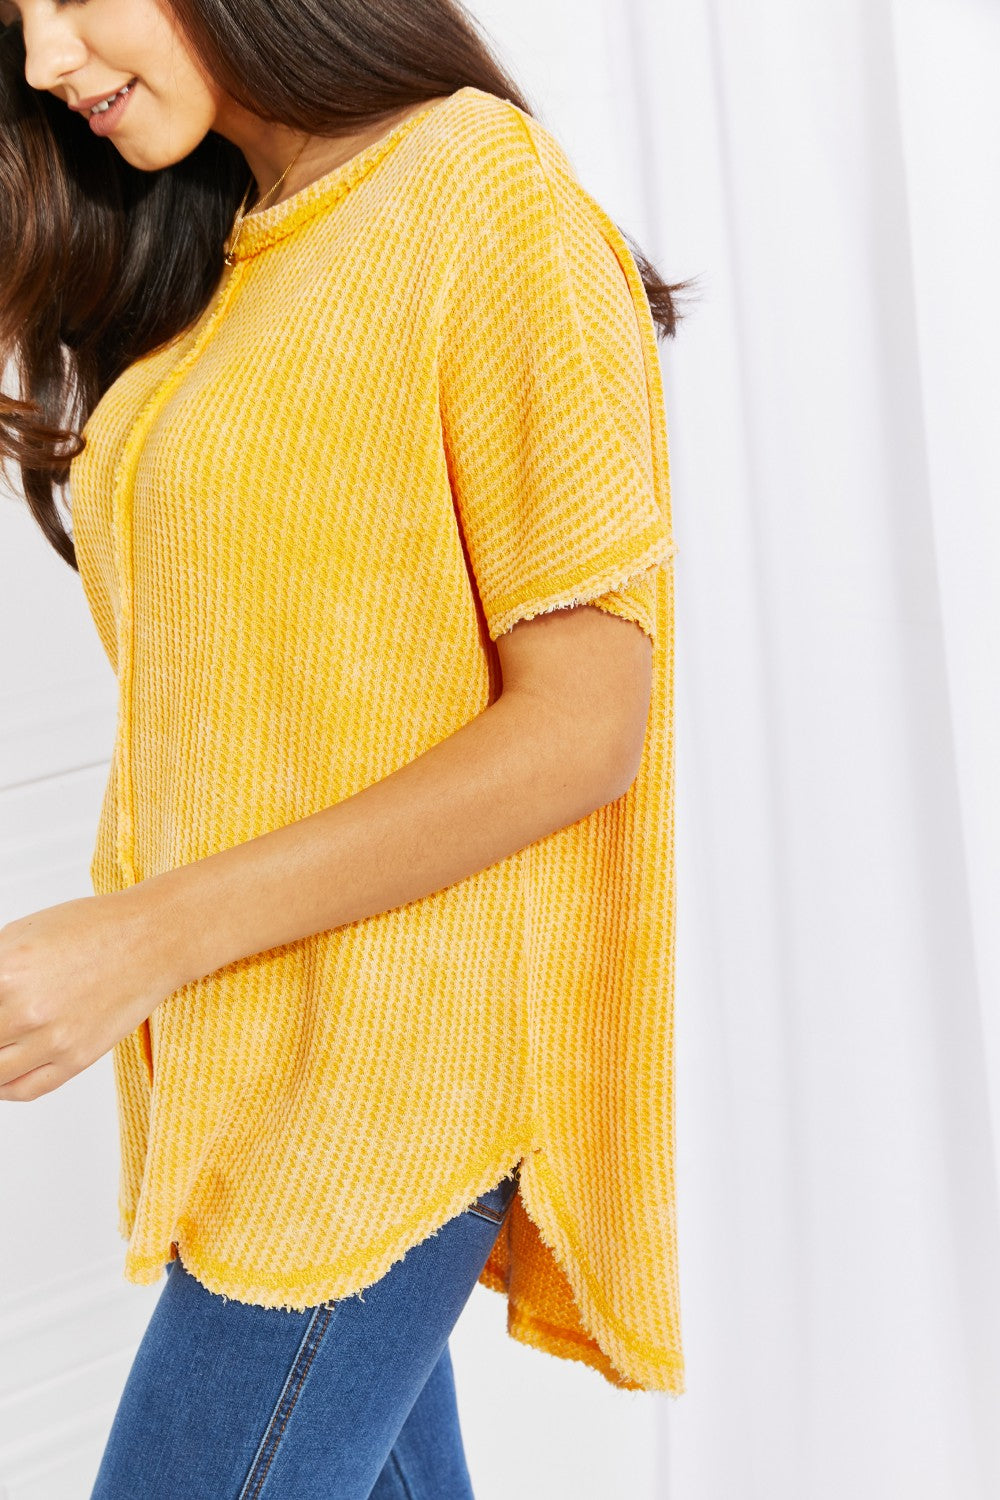 Zenana Start Small Washed Waffle Knit Top in Yellow Gold apparel & accessories